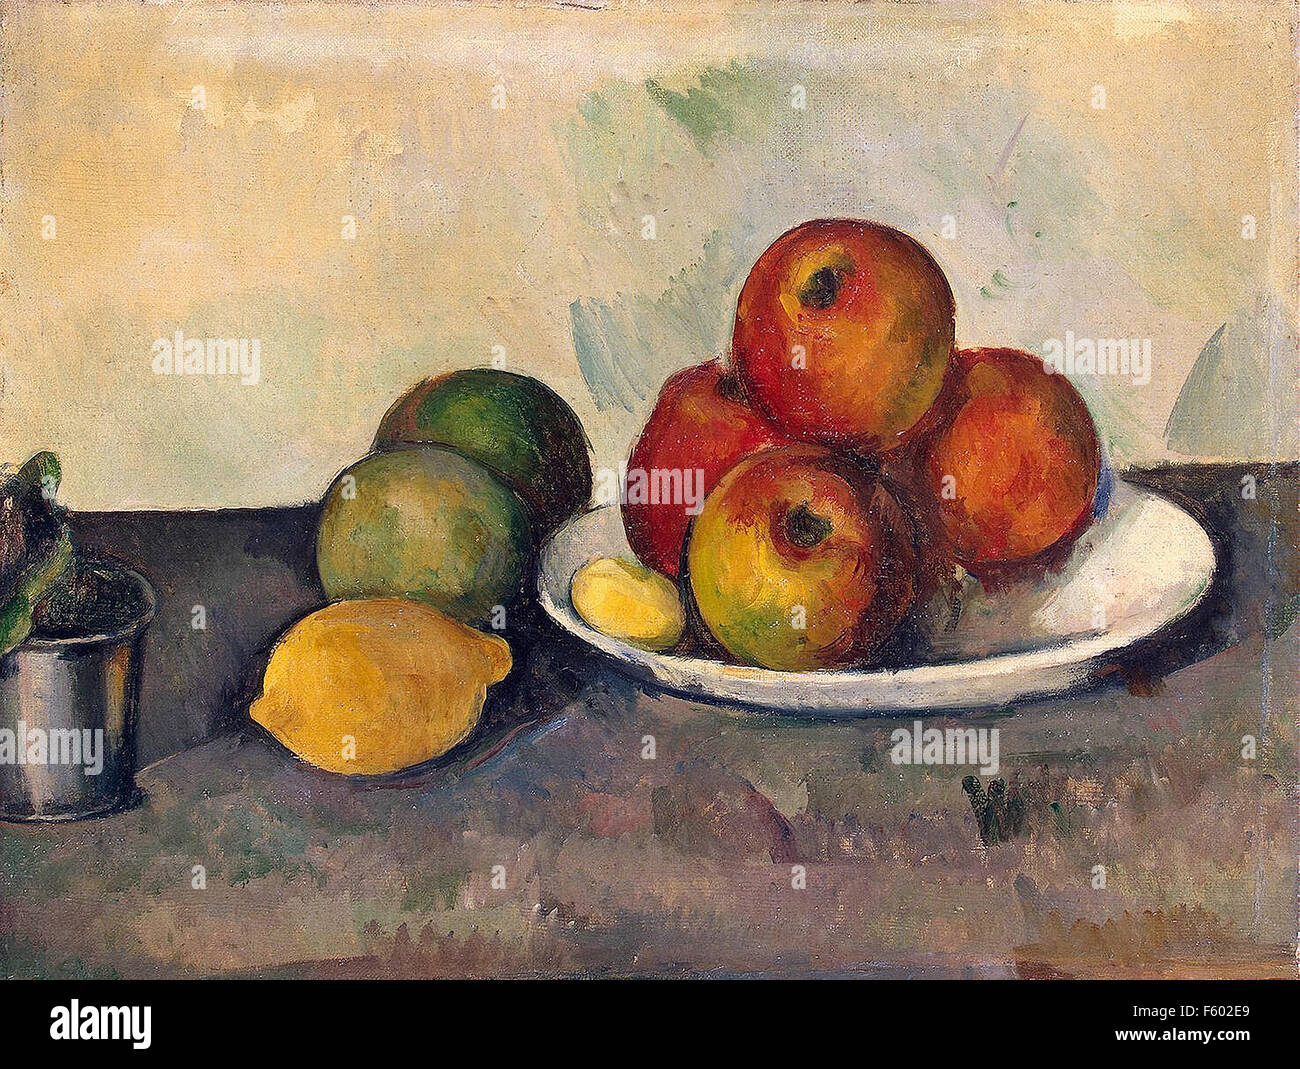 Paul Cézanne - Still Life with Apples Stock Photo